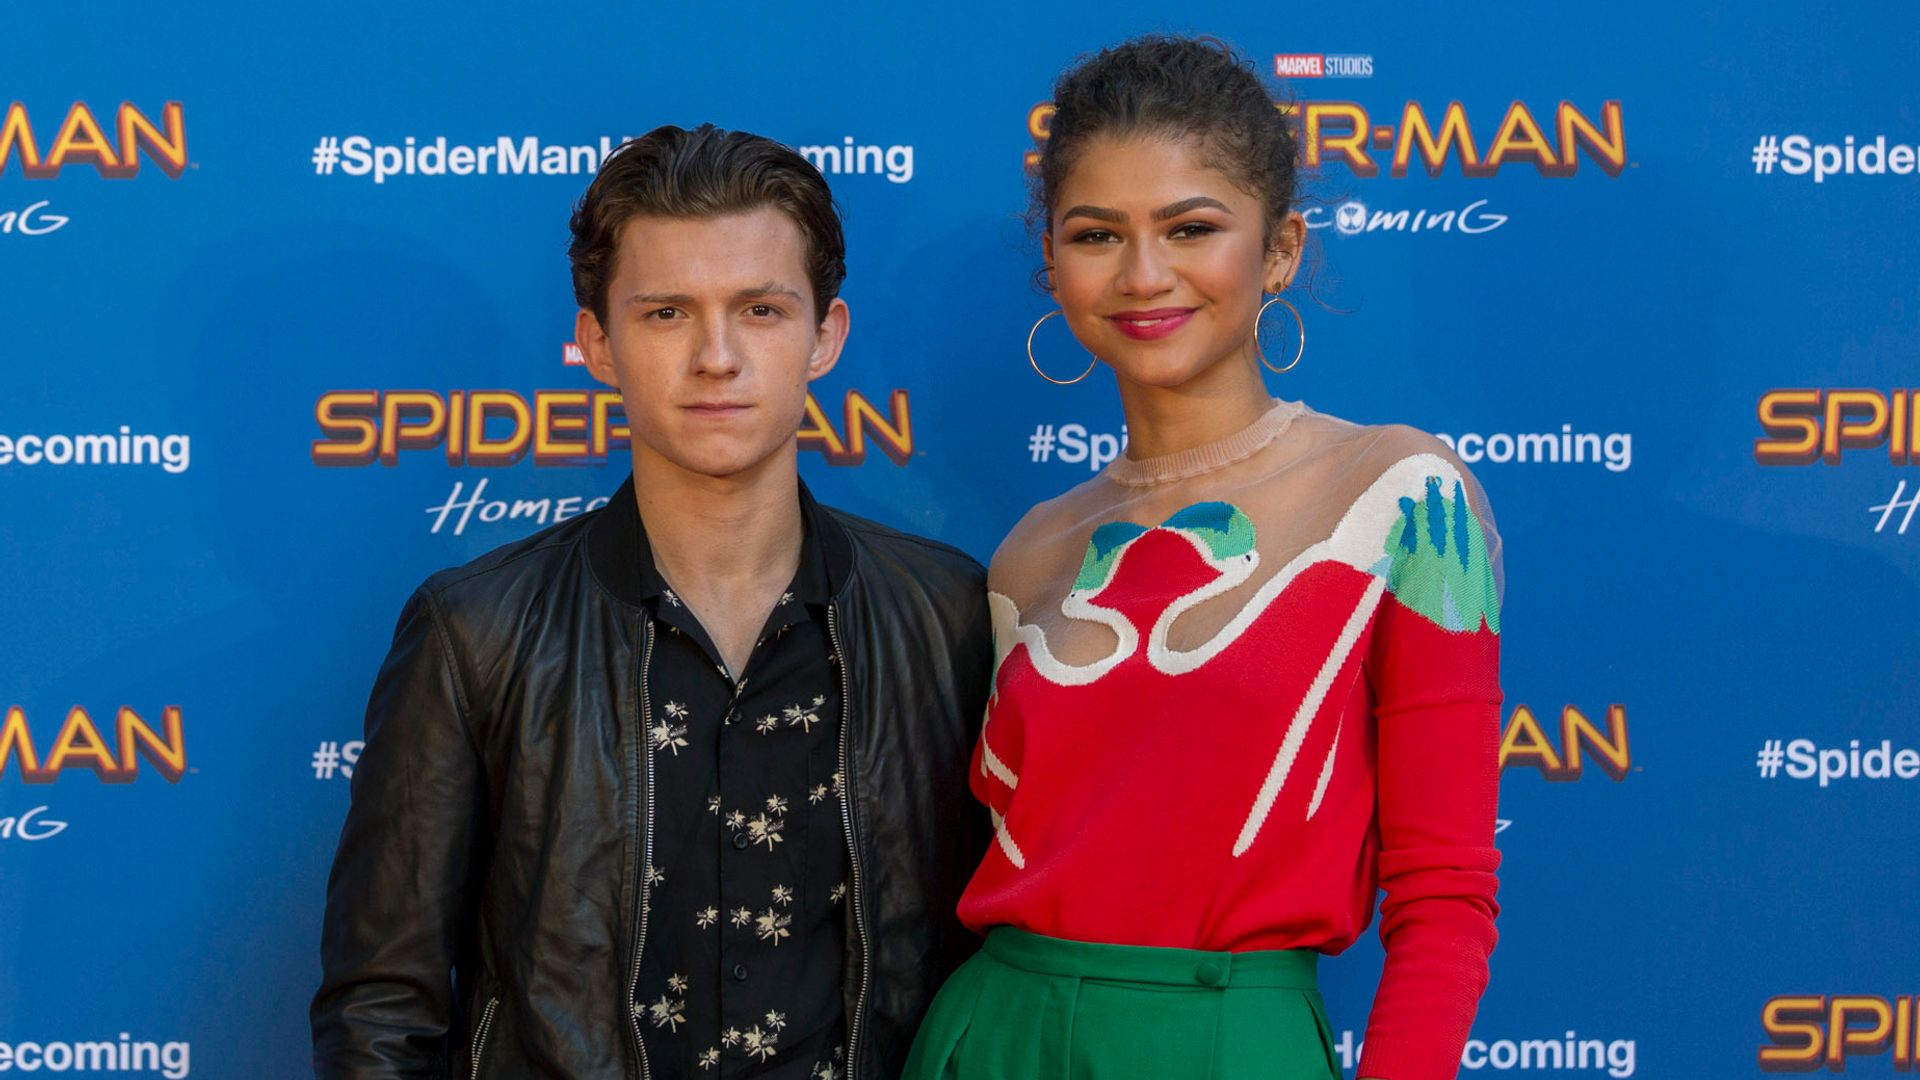 Zendaya and Tom posing in front of a Spider-Man Homecoming billboard